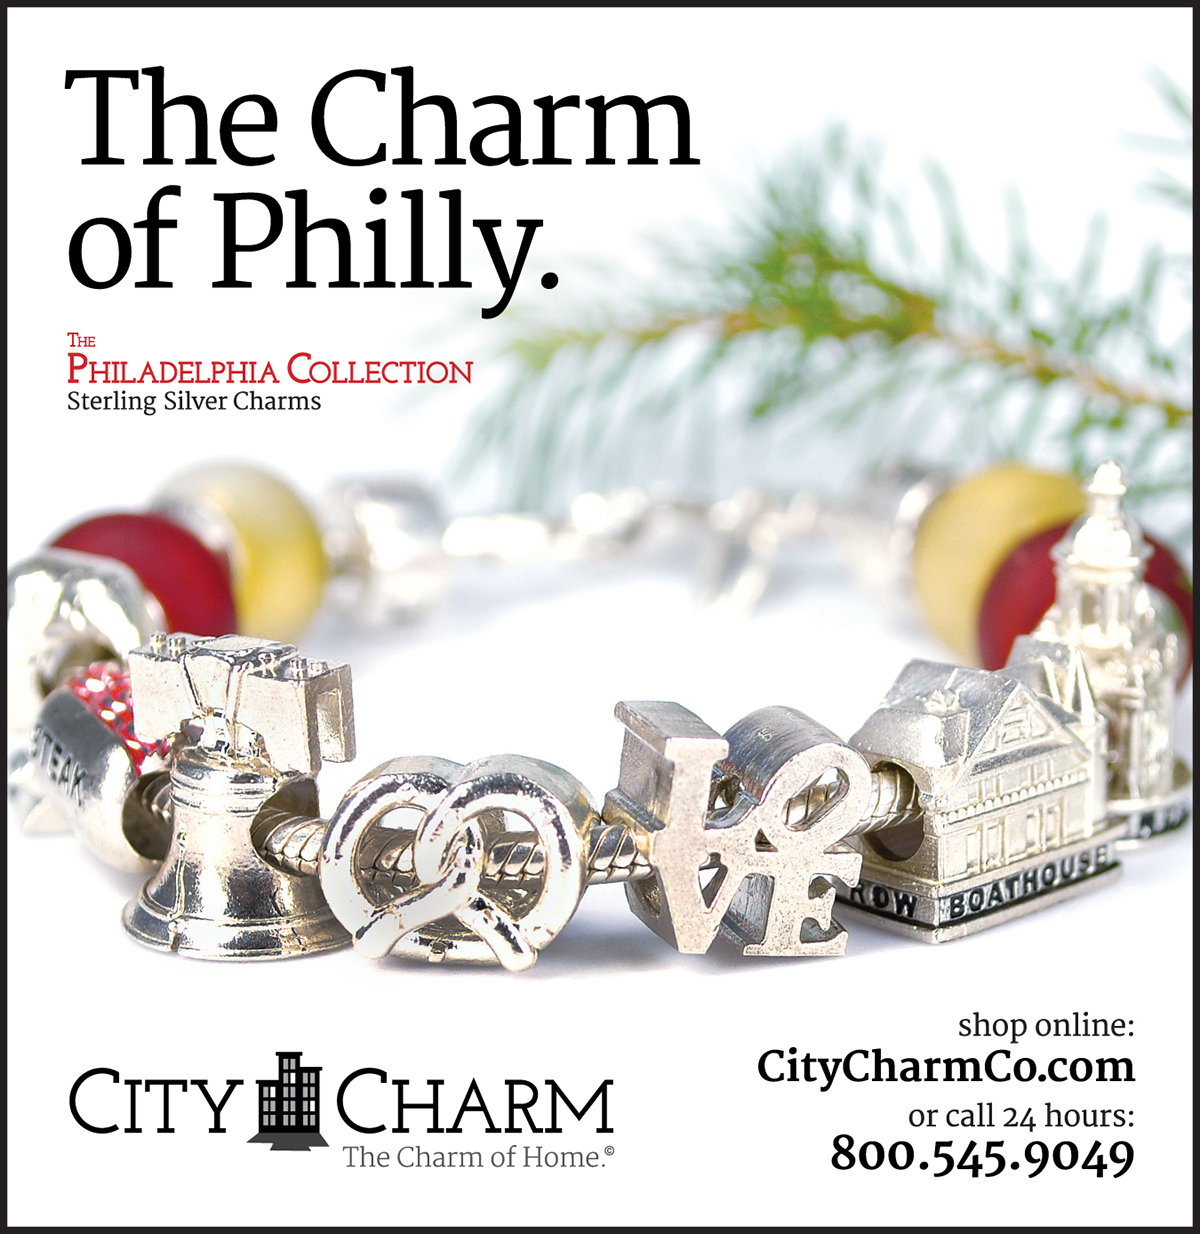 Newspaper Ad creative periodical jewelry marketing philadelphia Reading Lancaster Sterling Silver Charms